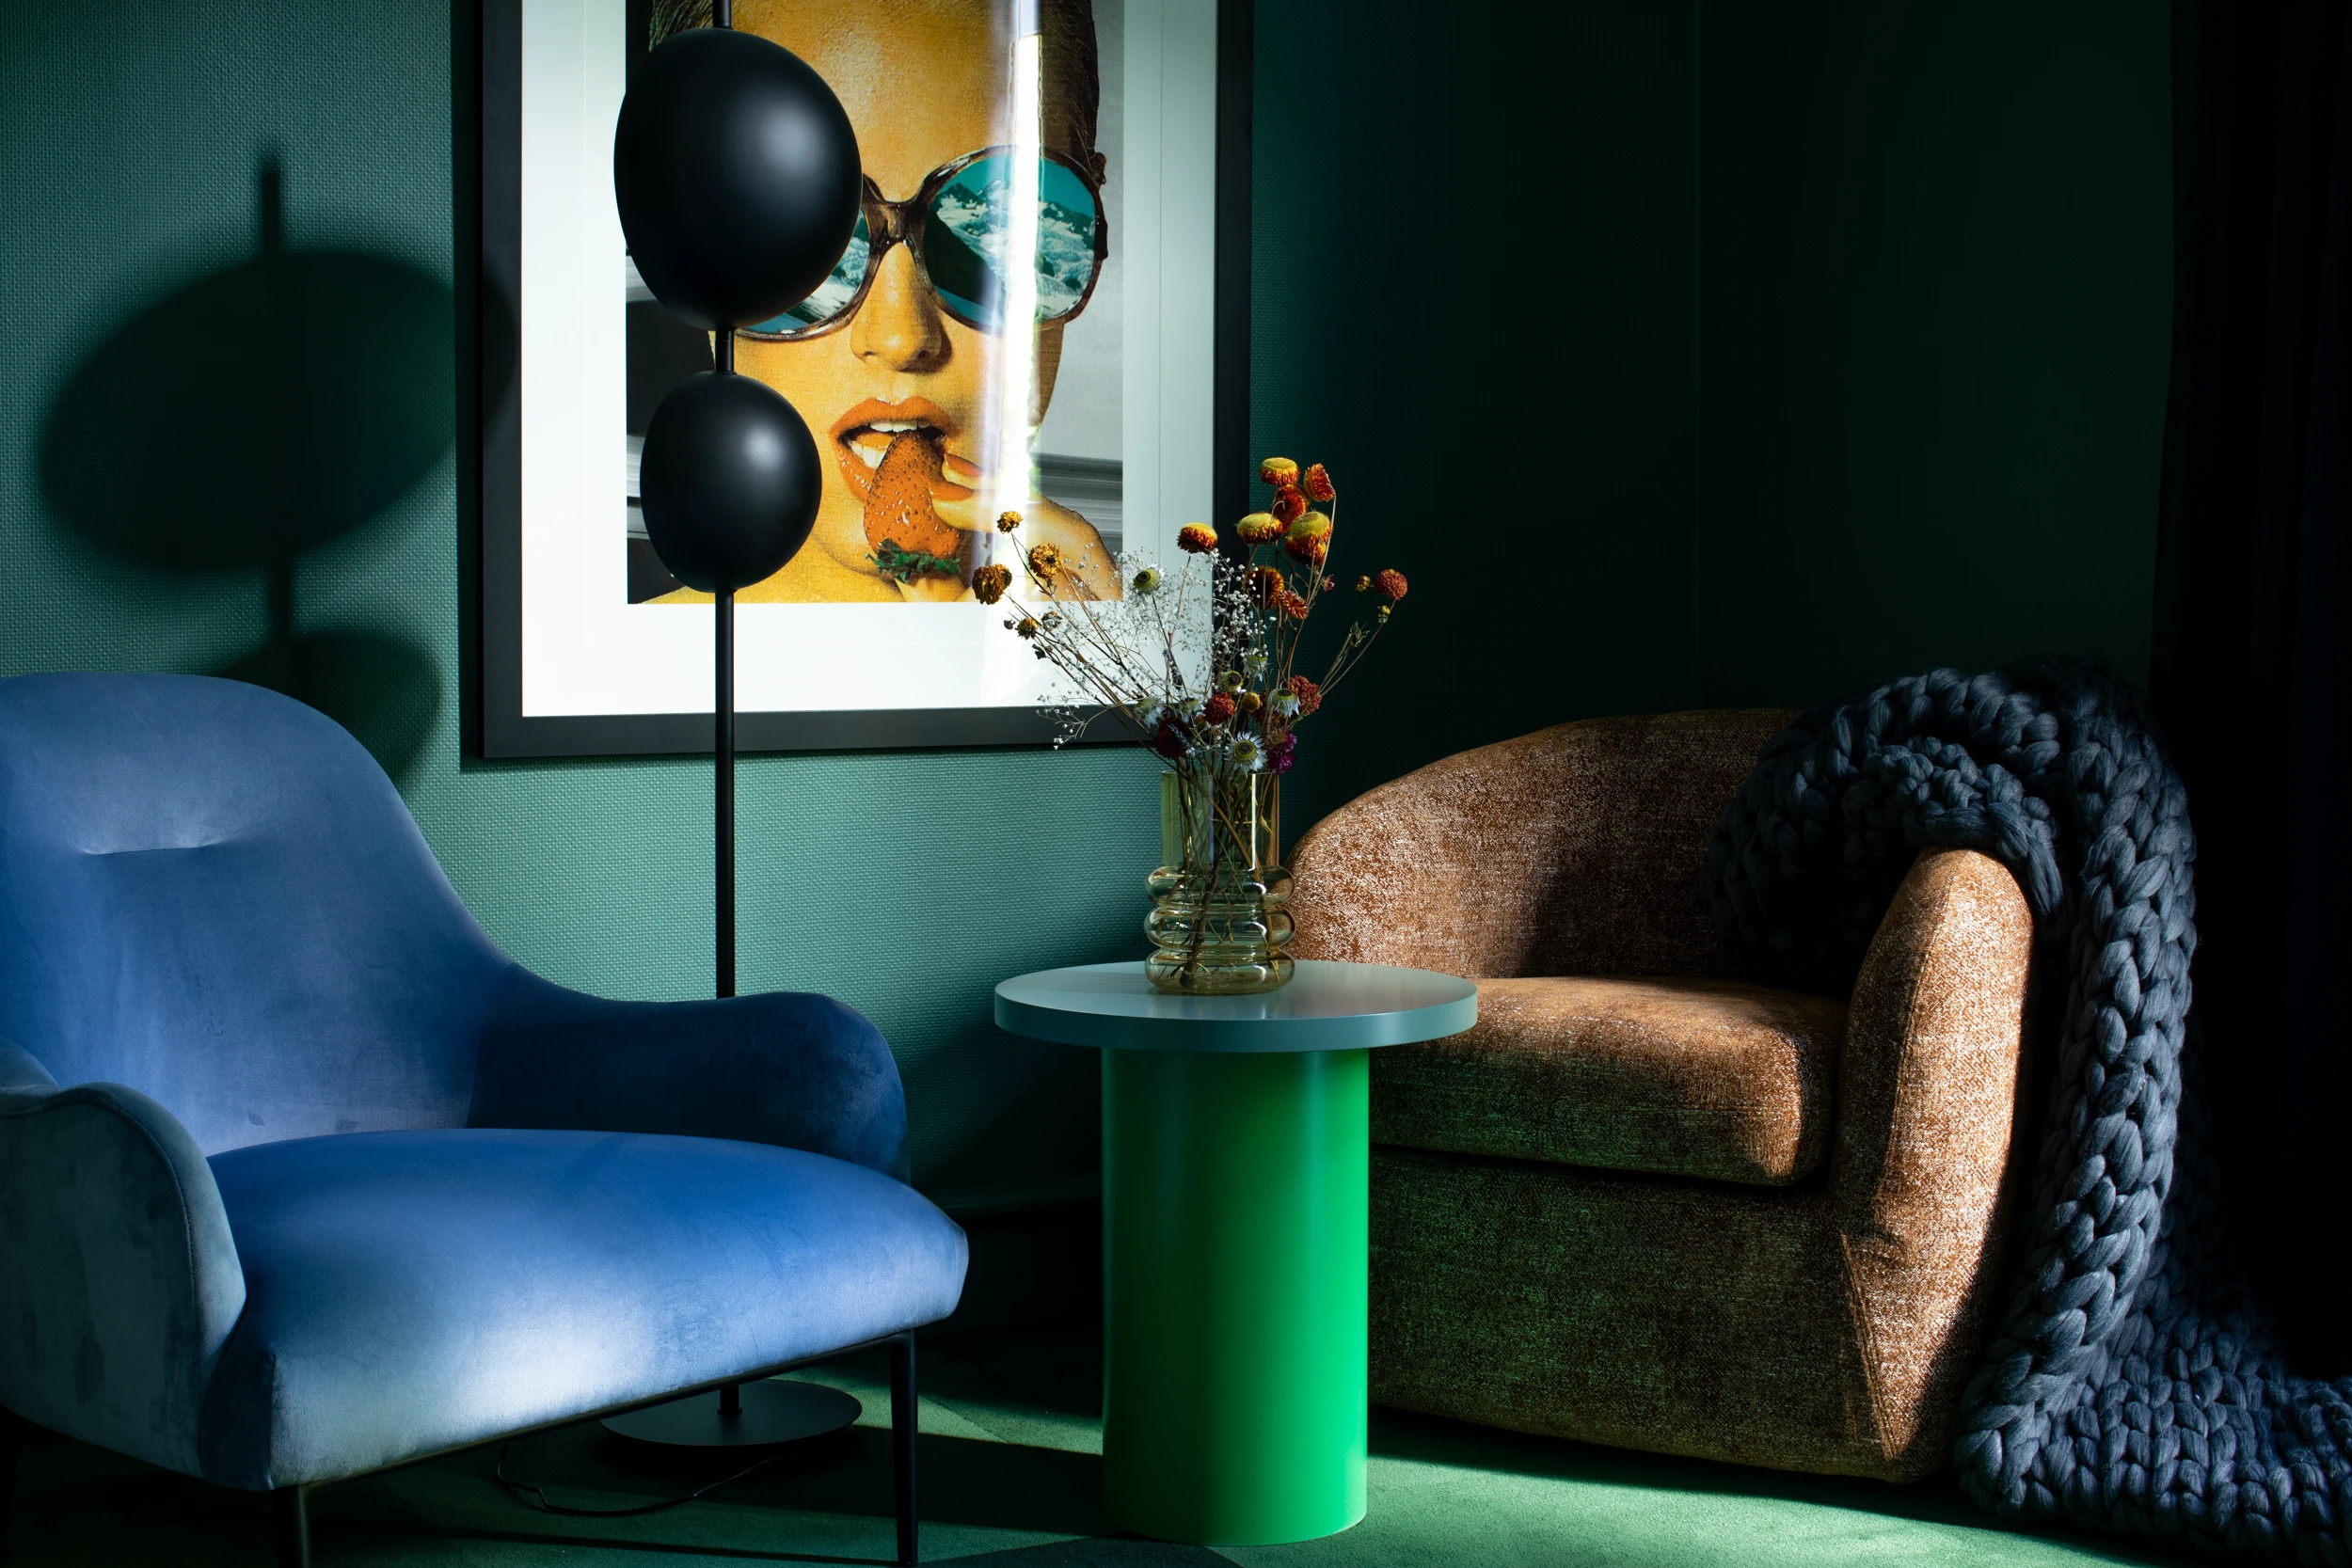 Blue armchair and brown armchair in green room